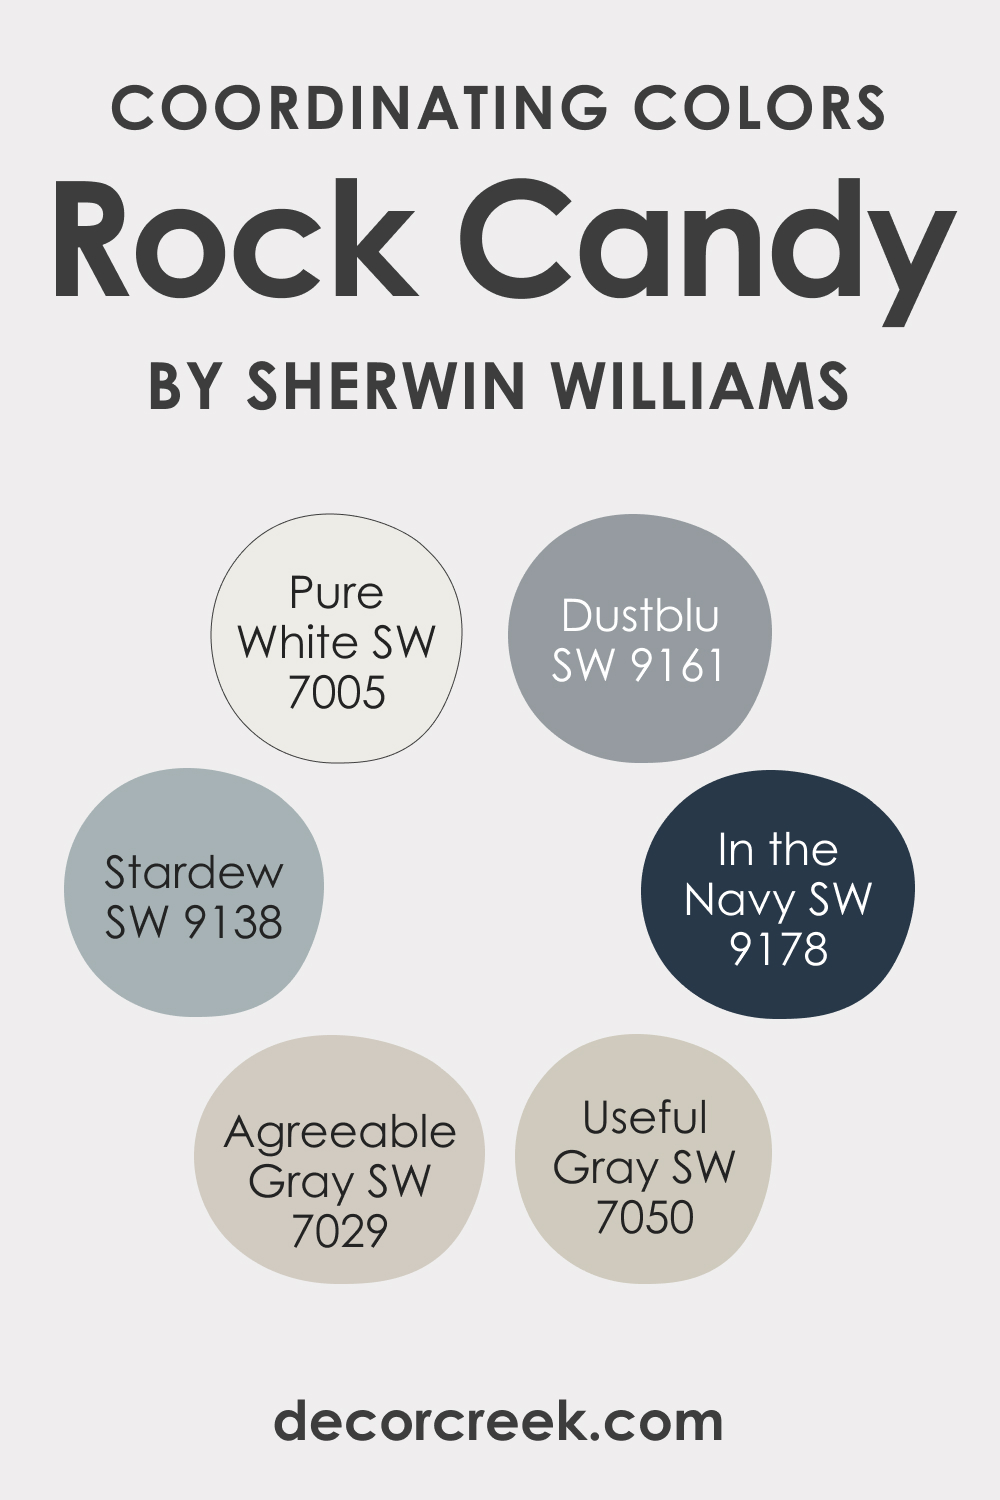 Coordinating Colors of SW 6231 Rock Candy